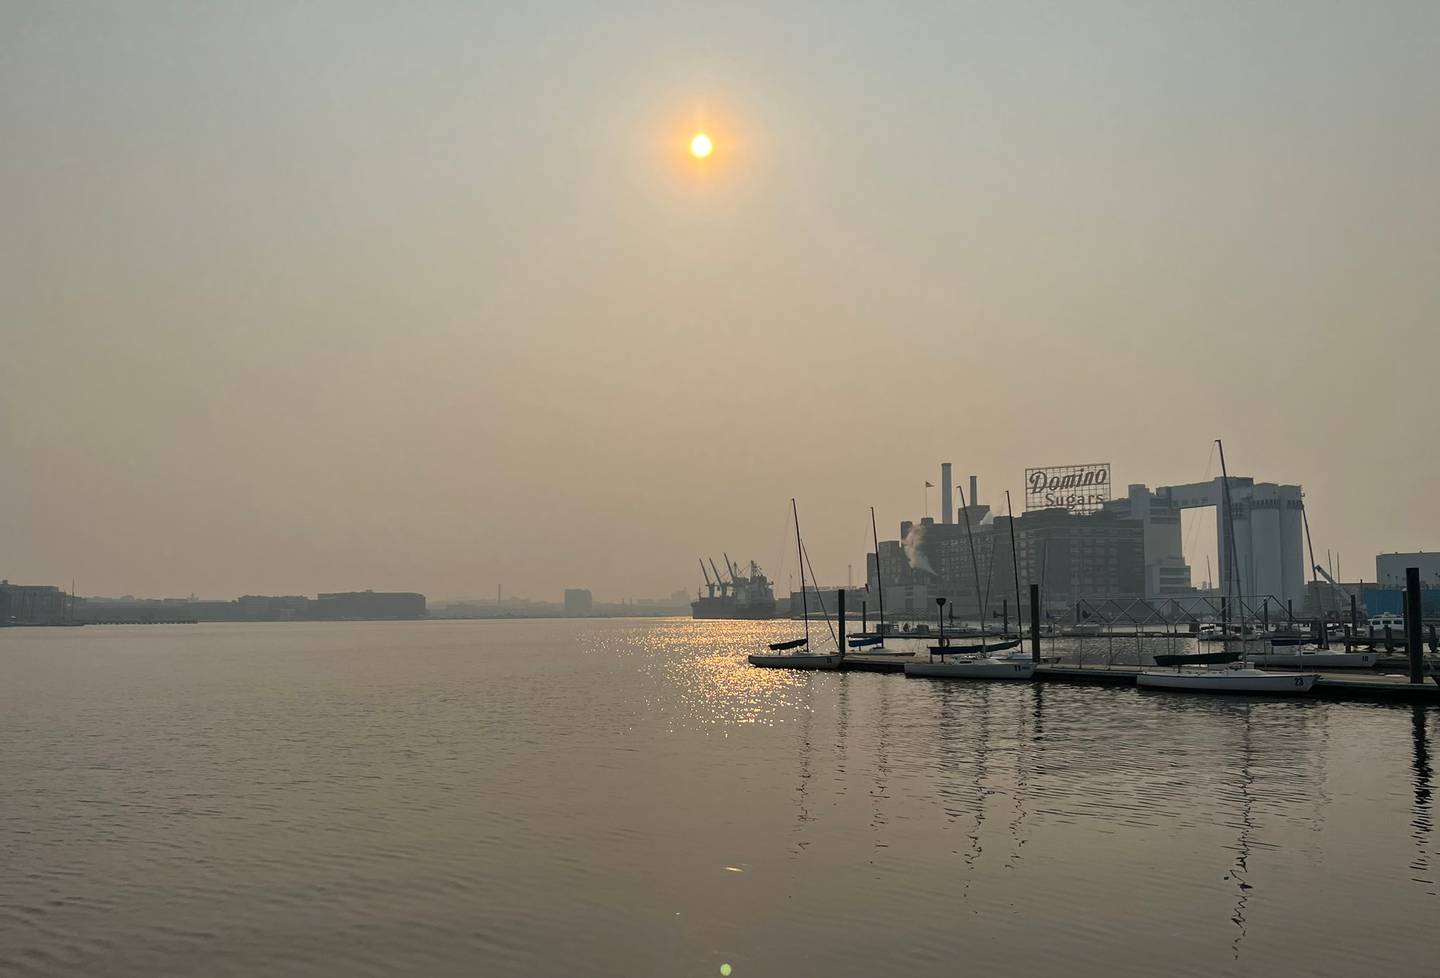 Smoke turns the sky hazy in downtown Baltimore in this photo of the Inner Harbor waterfront as the Domino Sugar sign sits in the distance.